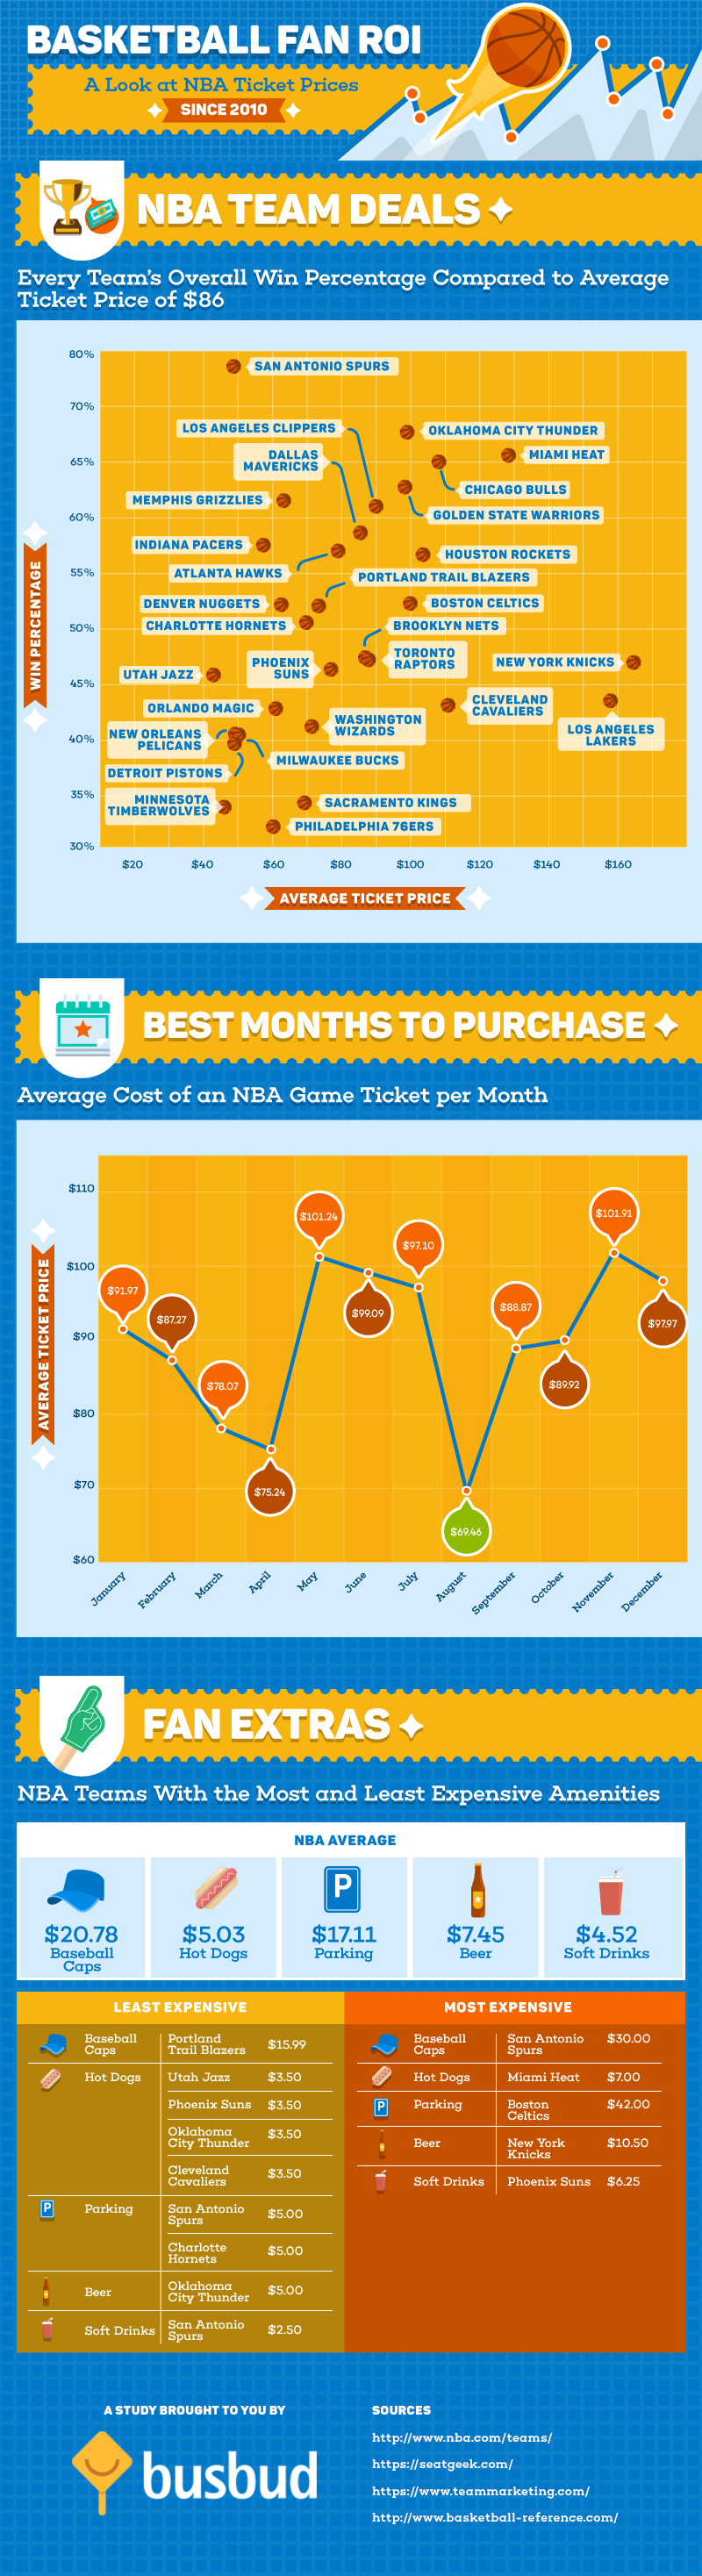 Basketball Fan ROI - A Look at NBA Ticket Prices since 2010